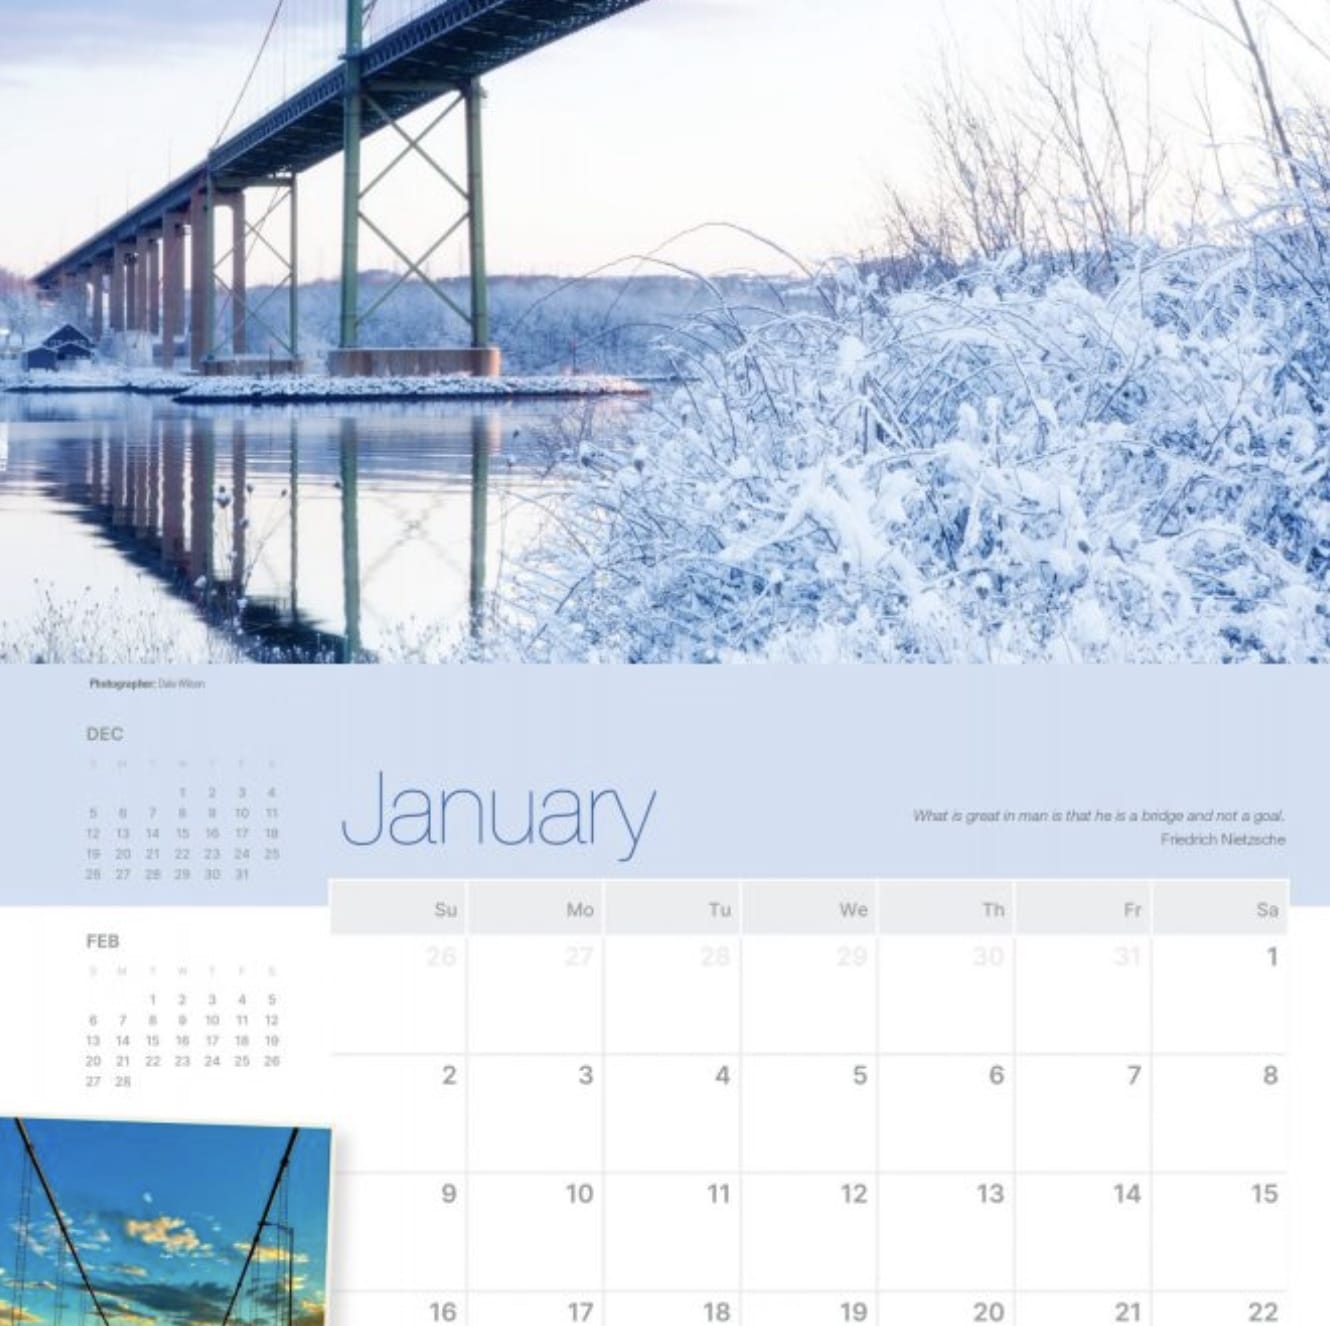 The MacKay Bridge in winter is pictured in the January month of the Halifax Harbour Bridges fundraiser calendar.